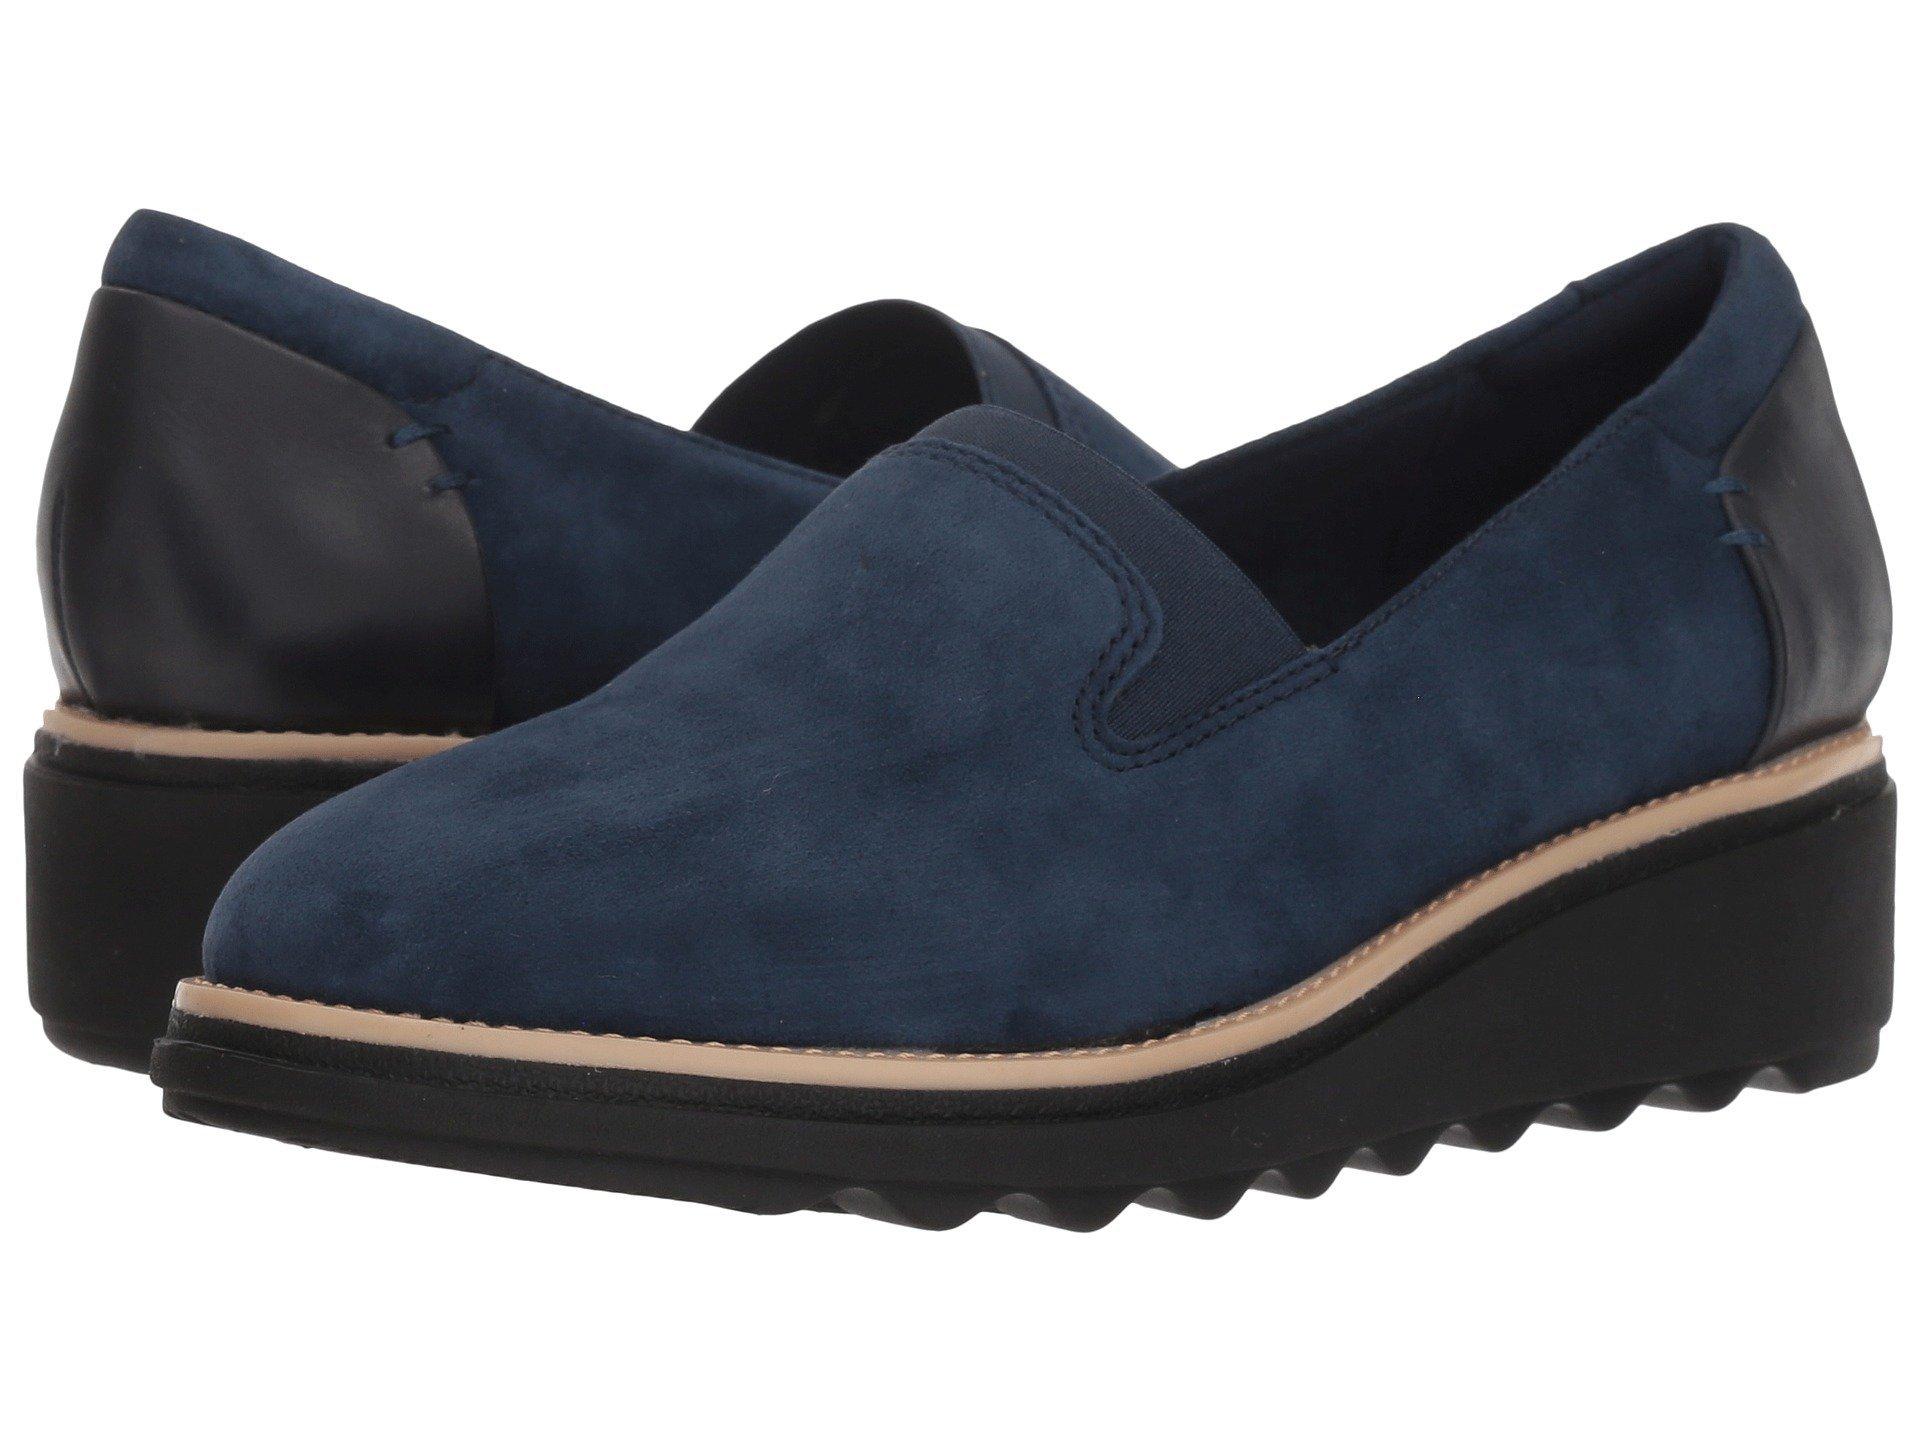 Clarks Suede Sharon Dolly in Navy Suede (Blue) - Lyst